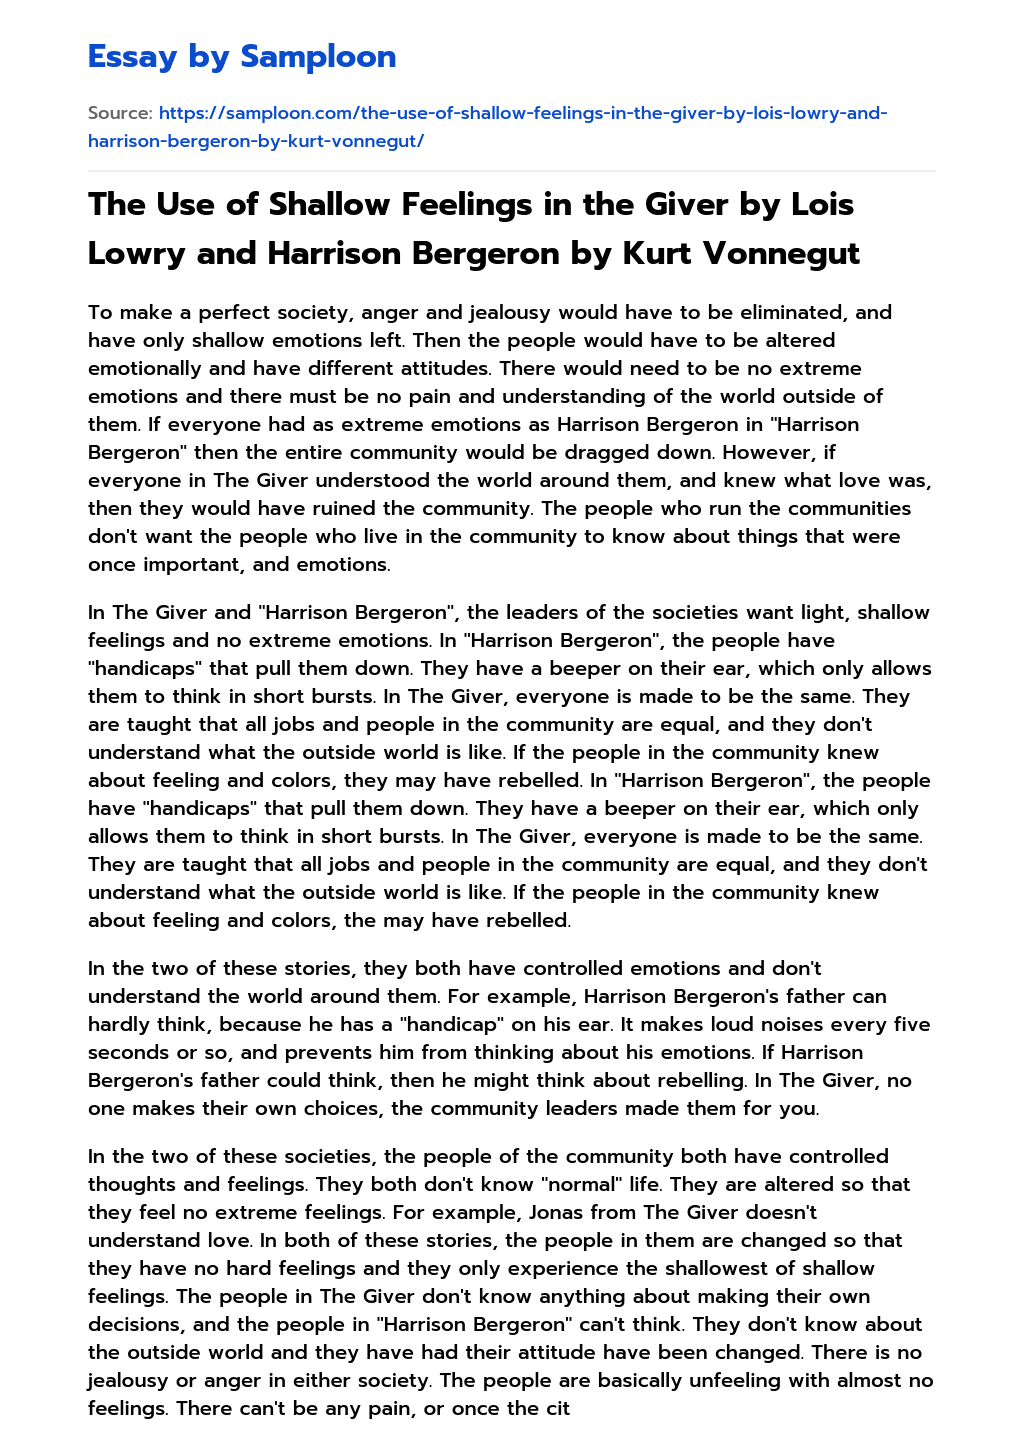 The Use of Shallow Feelings in the Giver by Lois Lowry and Harrison Bergeron by Kurt Vonnegut essay